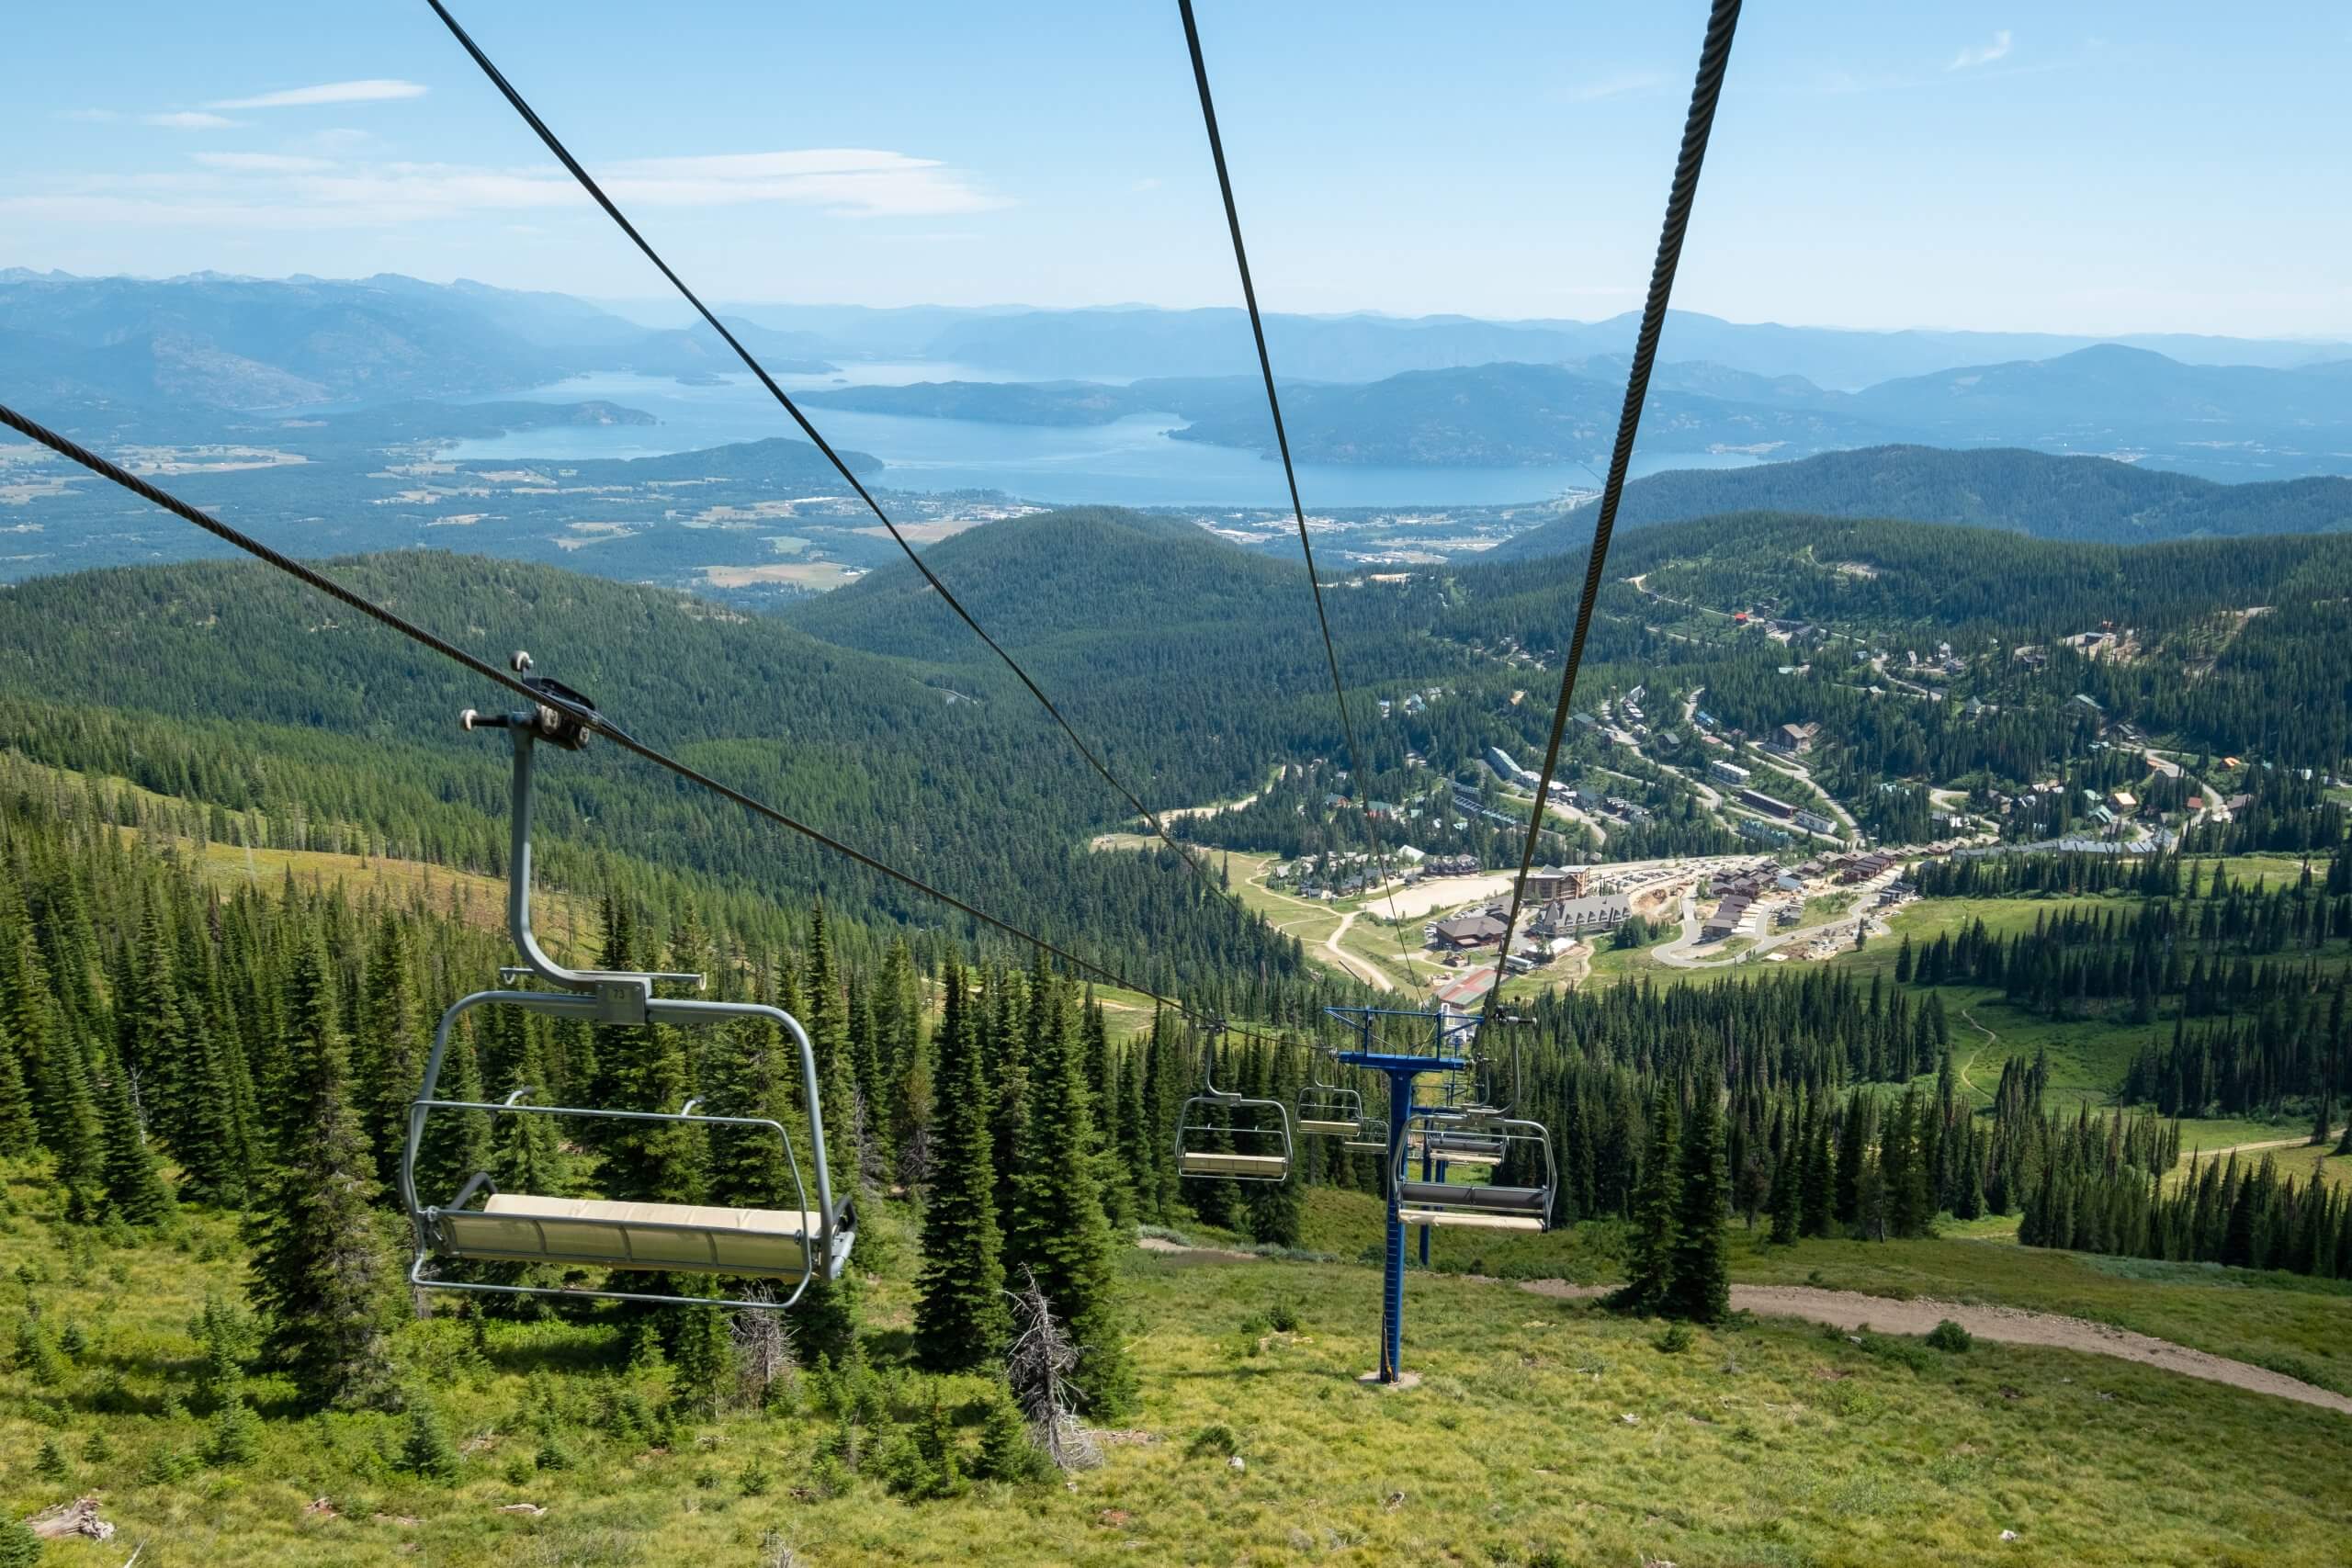 A scenic view of Schweitzer Resort from the top of the mountain, looking down the scenic chairlift.